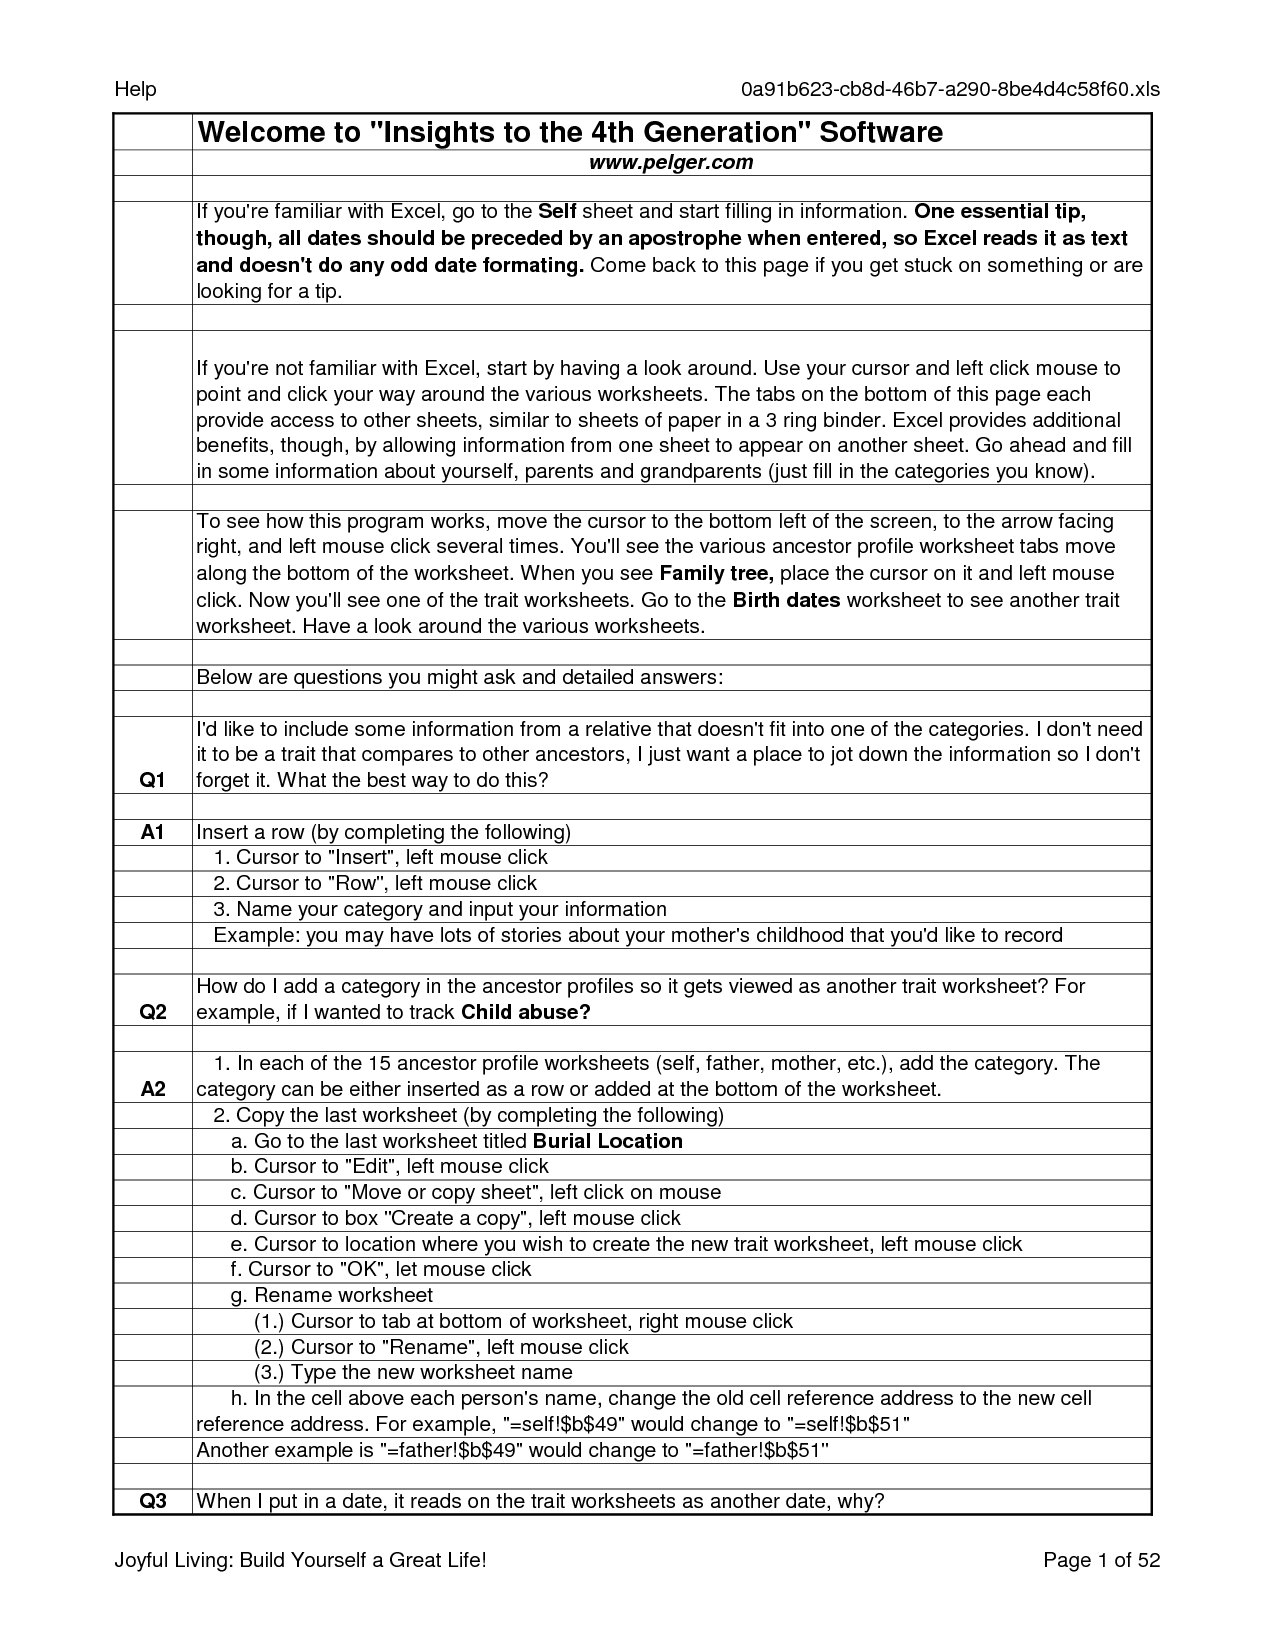 14 Best Images of Printable Counseling Worksheets Printable Marriage